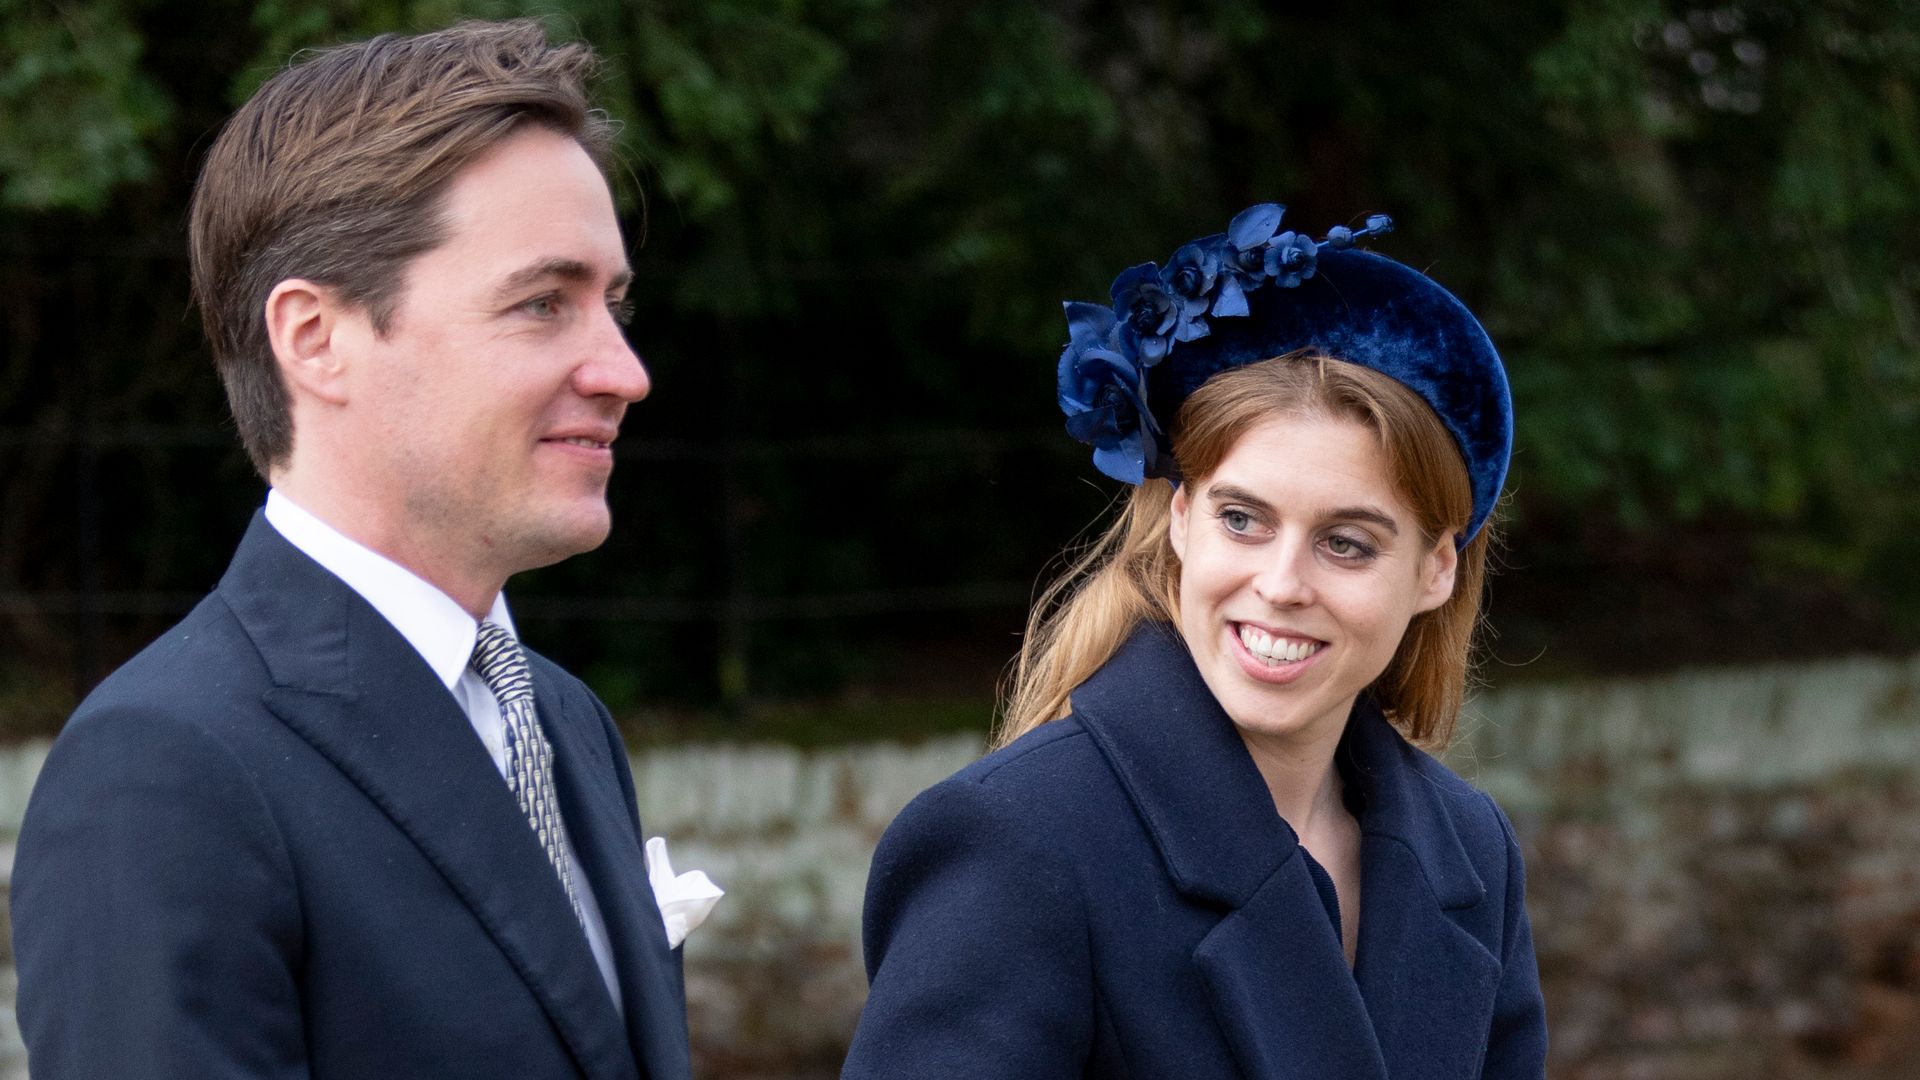 Princess Beatrice looked beautiful in her navy blue coat